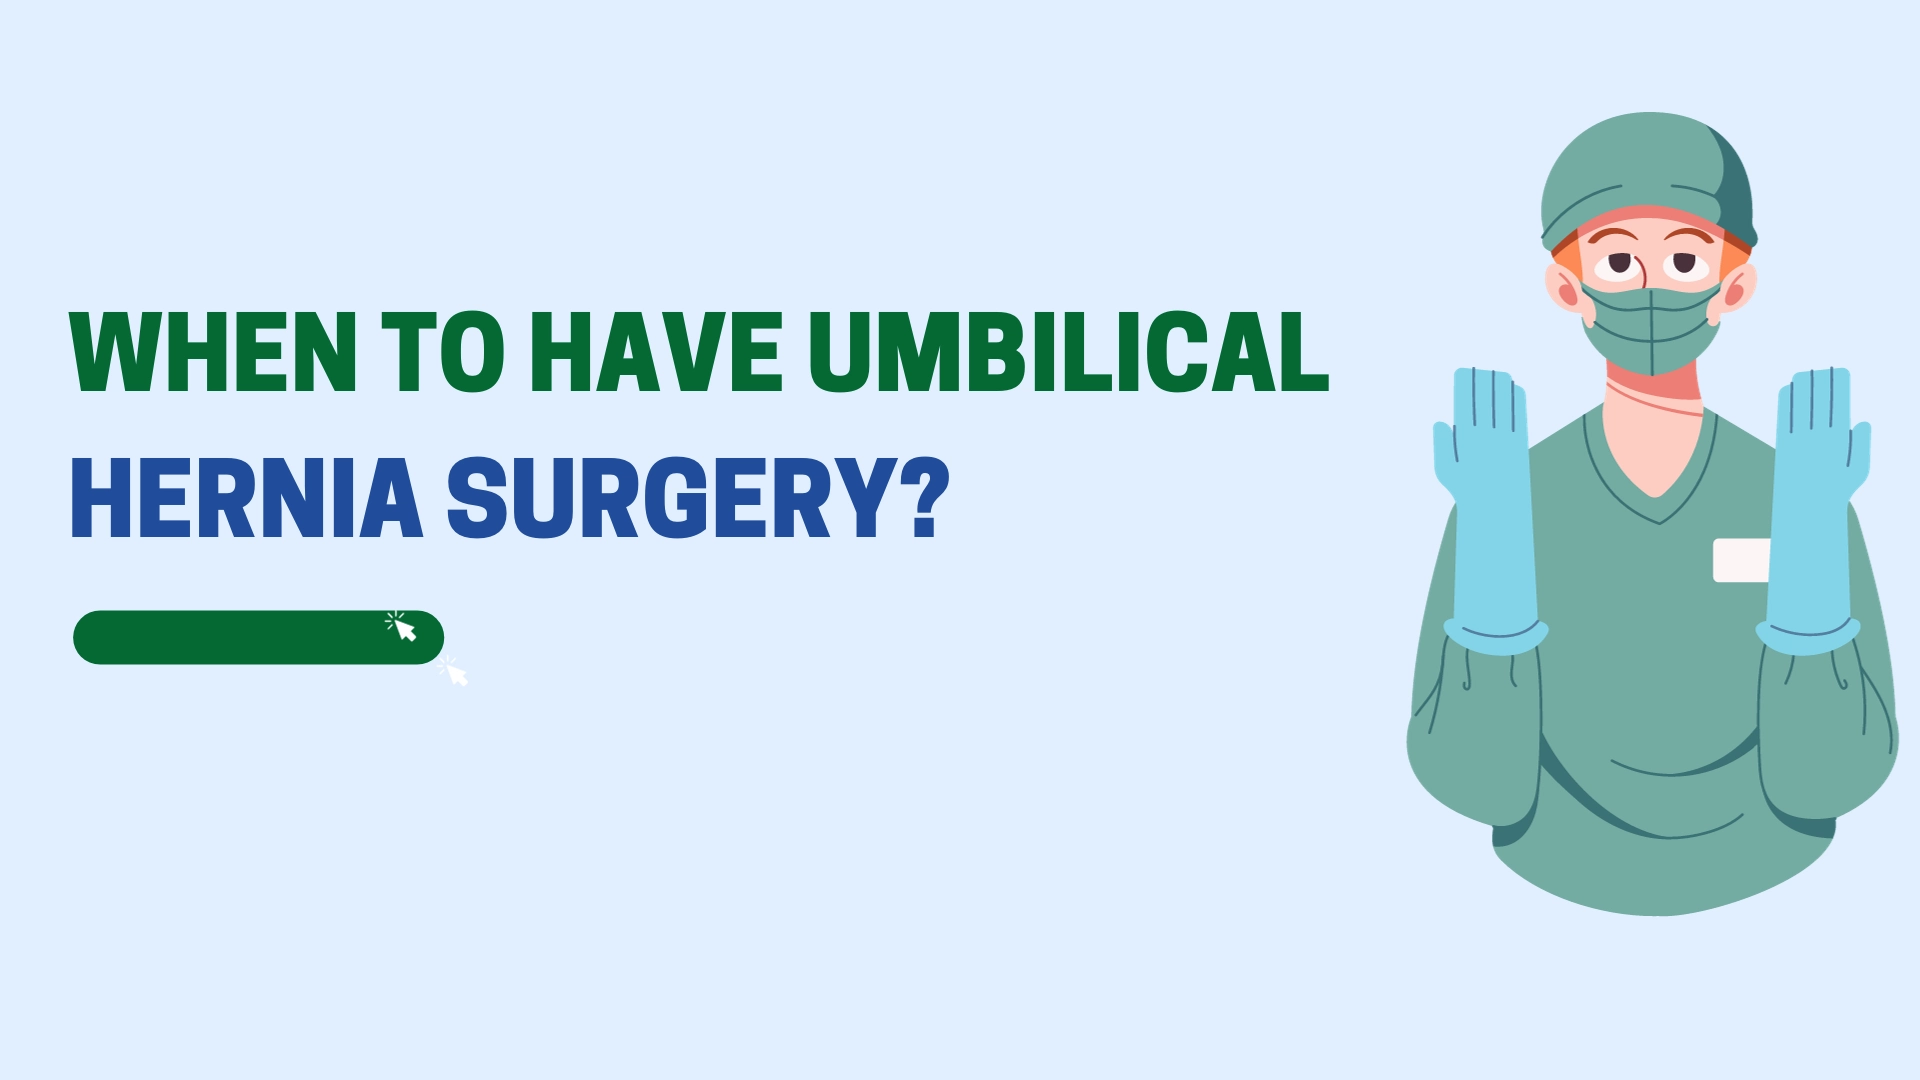 When to Have Umbilical Hernia Surgery